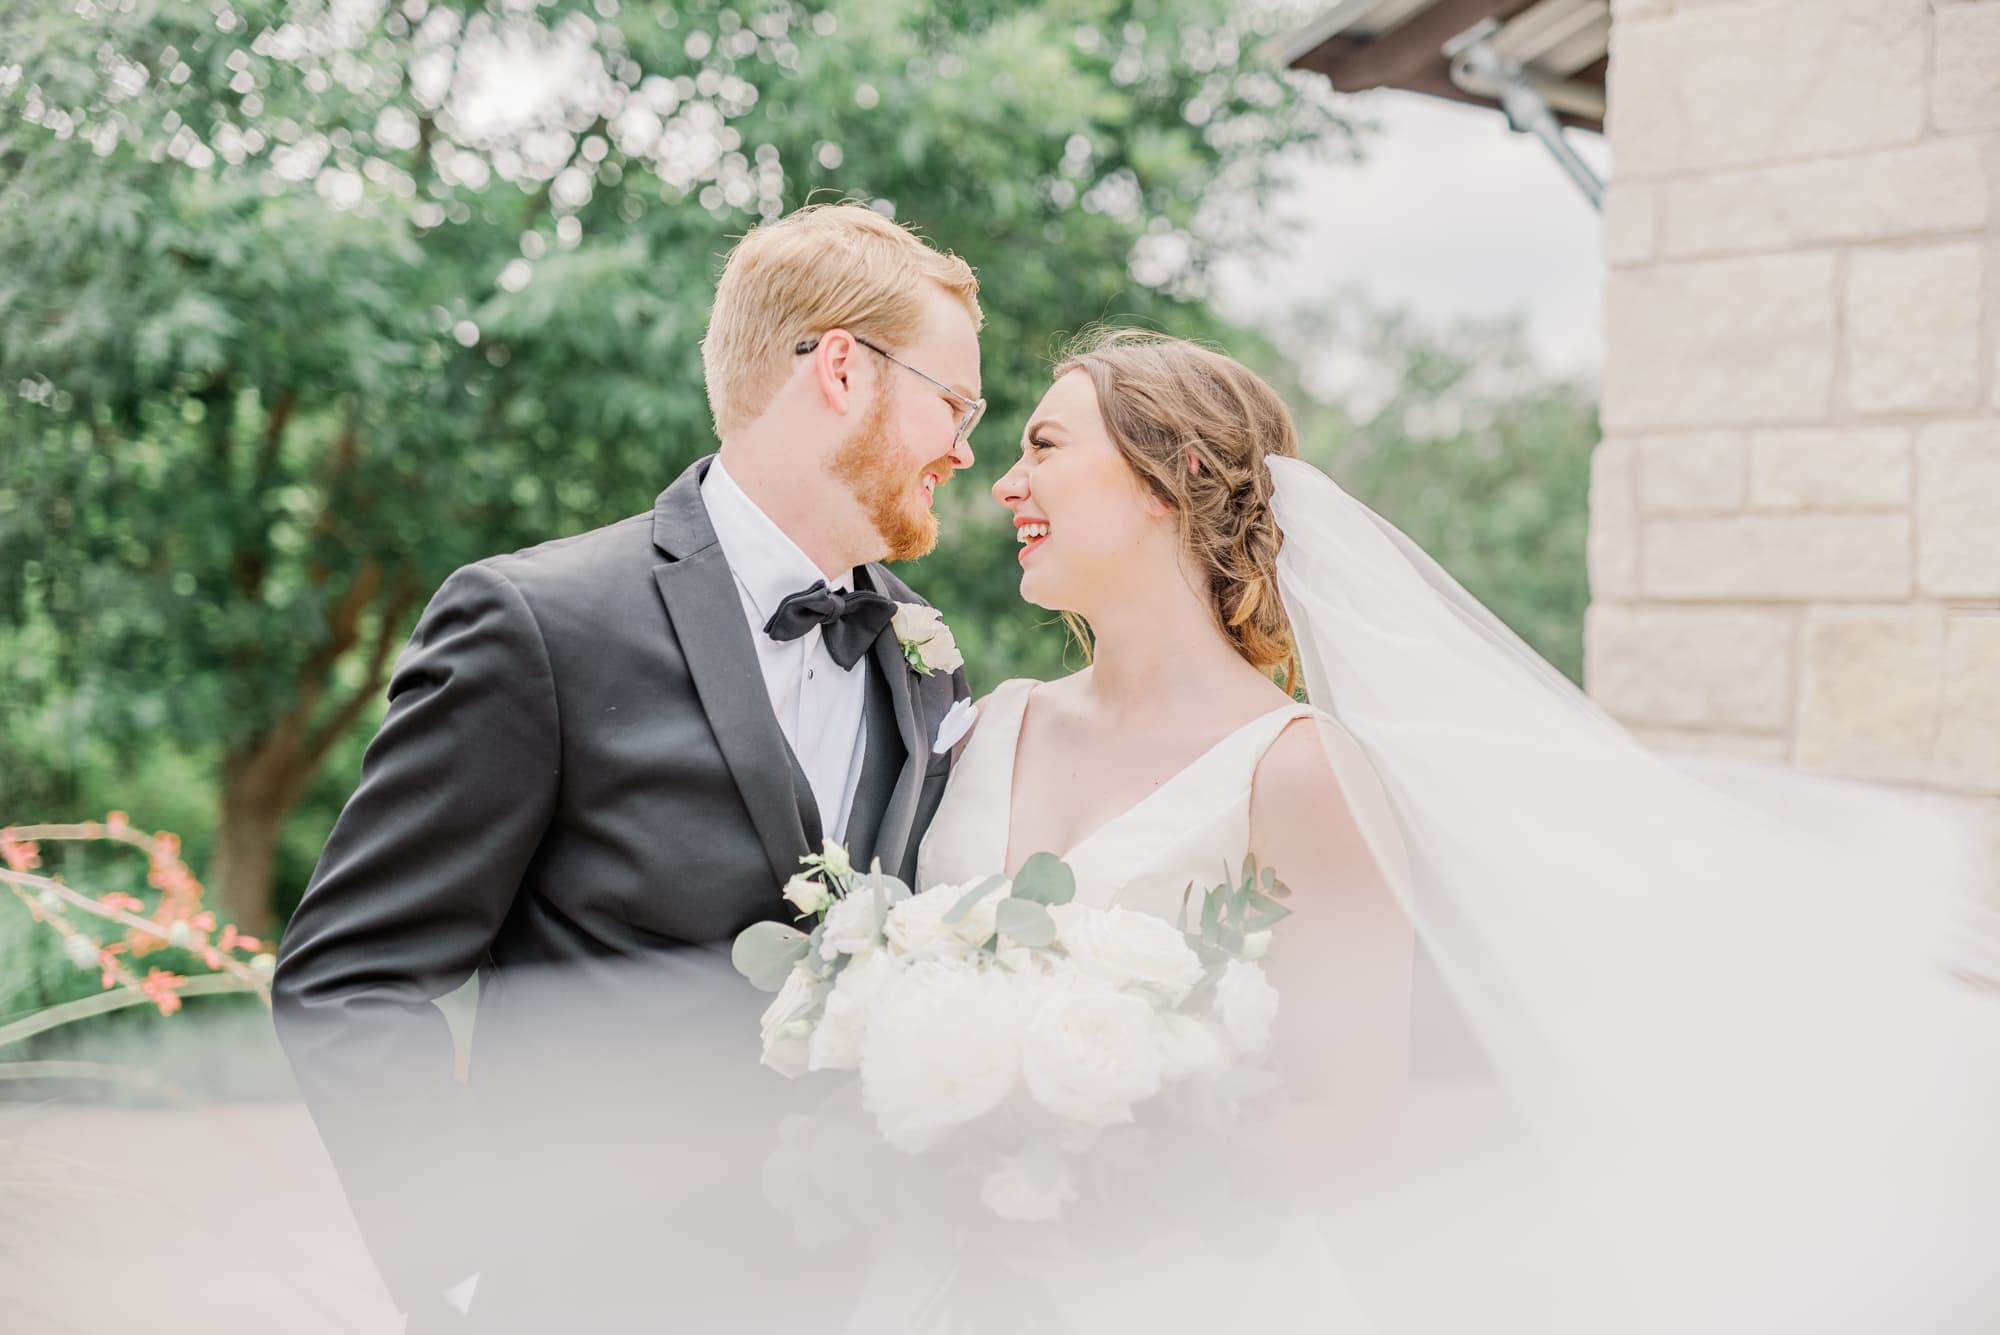 Laughing and Smiling Bride and Groom | Carleen Bright Arboretum in Waco TX by DFW Dallas wedding photographer Karina Danielle Photography